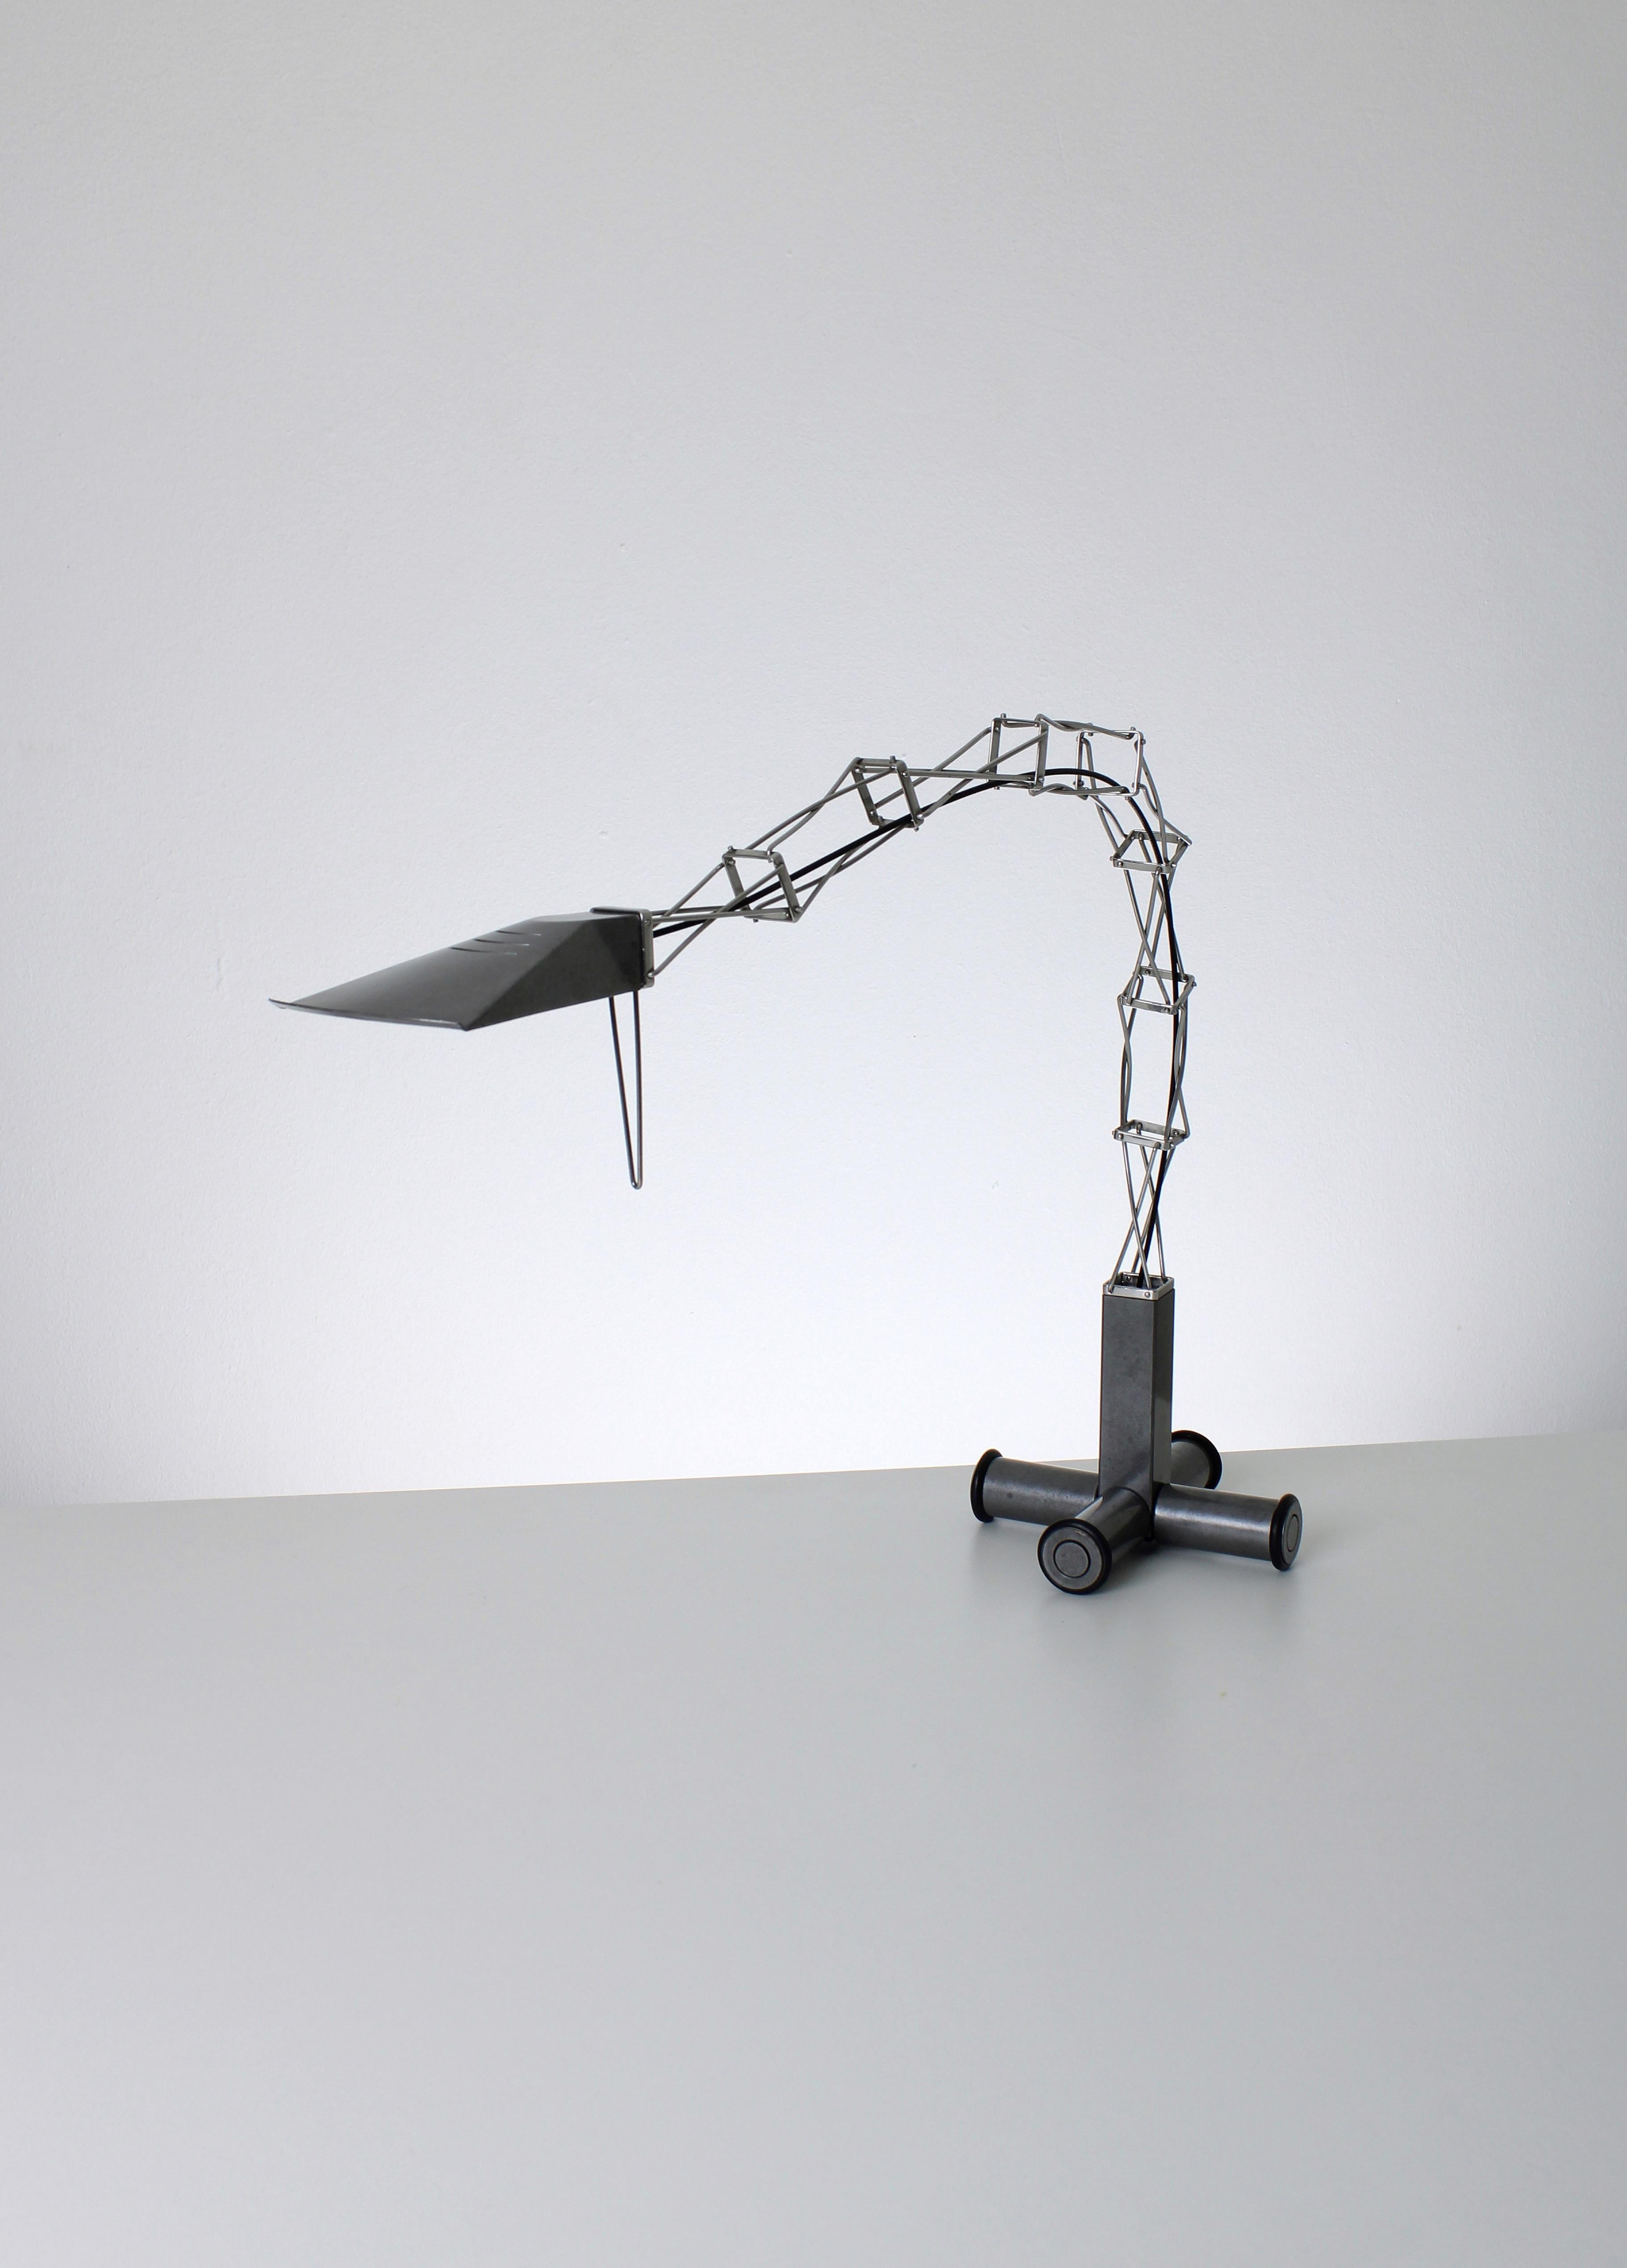 Multix halogen desk lamp designed by the Israeli designer Yaacov Kaufman for Lumina Italy in the 1980s. This large desk lamp has some interesting details, for instance the pivoting base with wheels which makes it rotatable. The arm of the lamp is